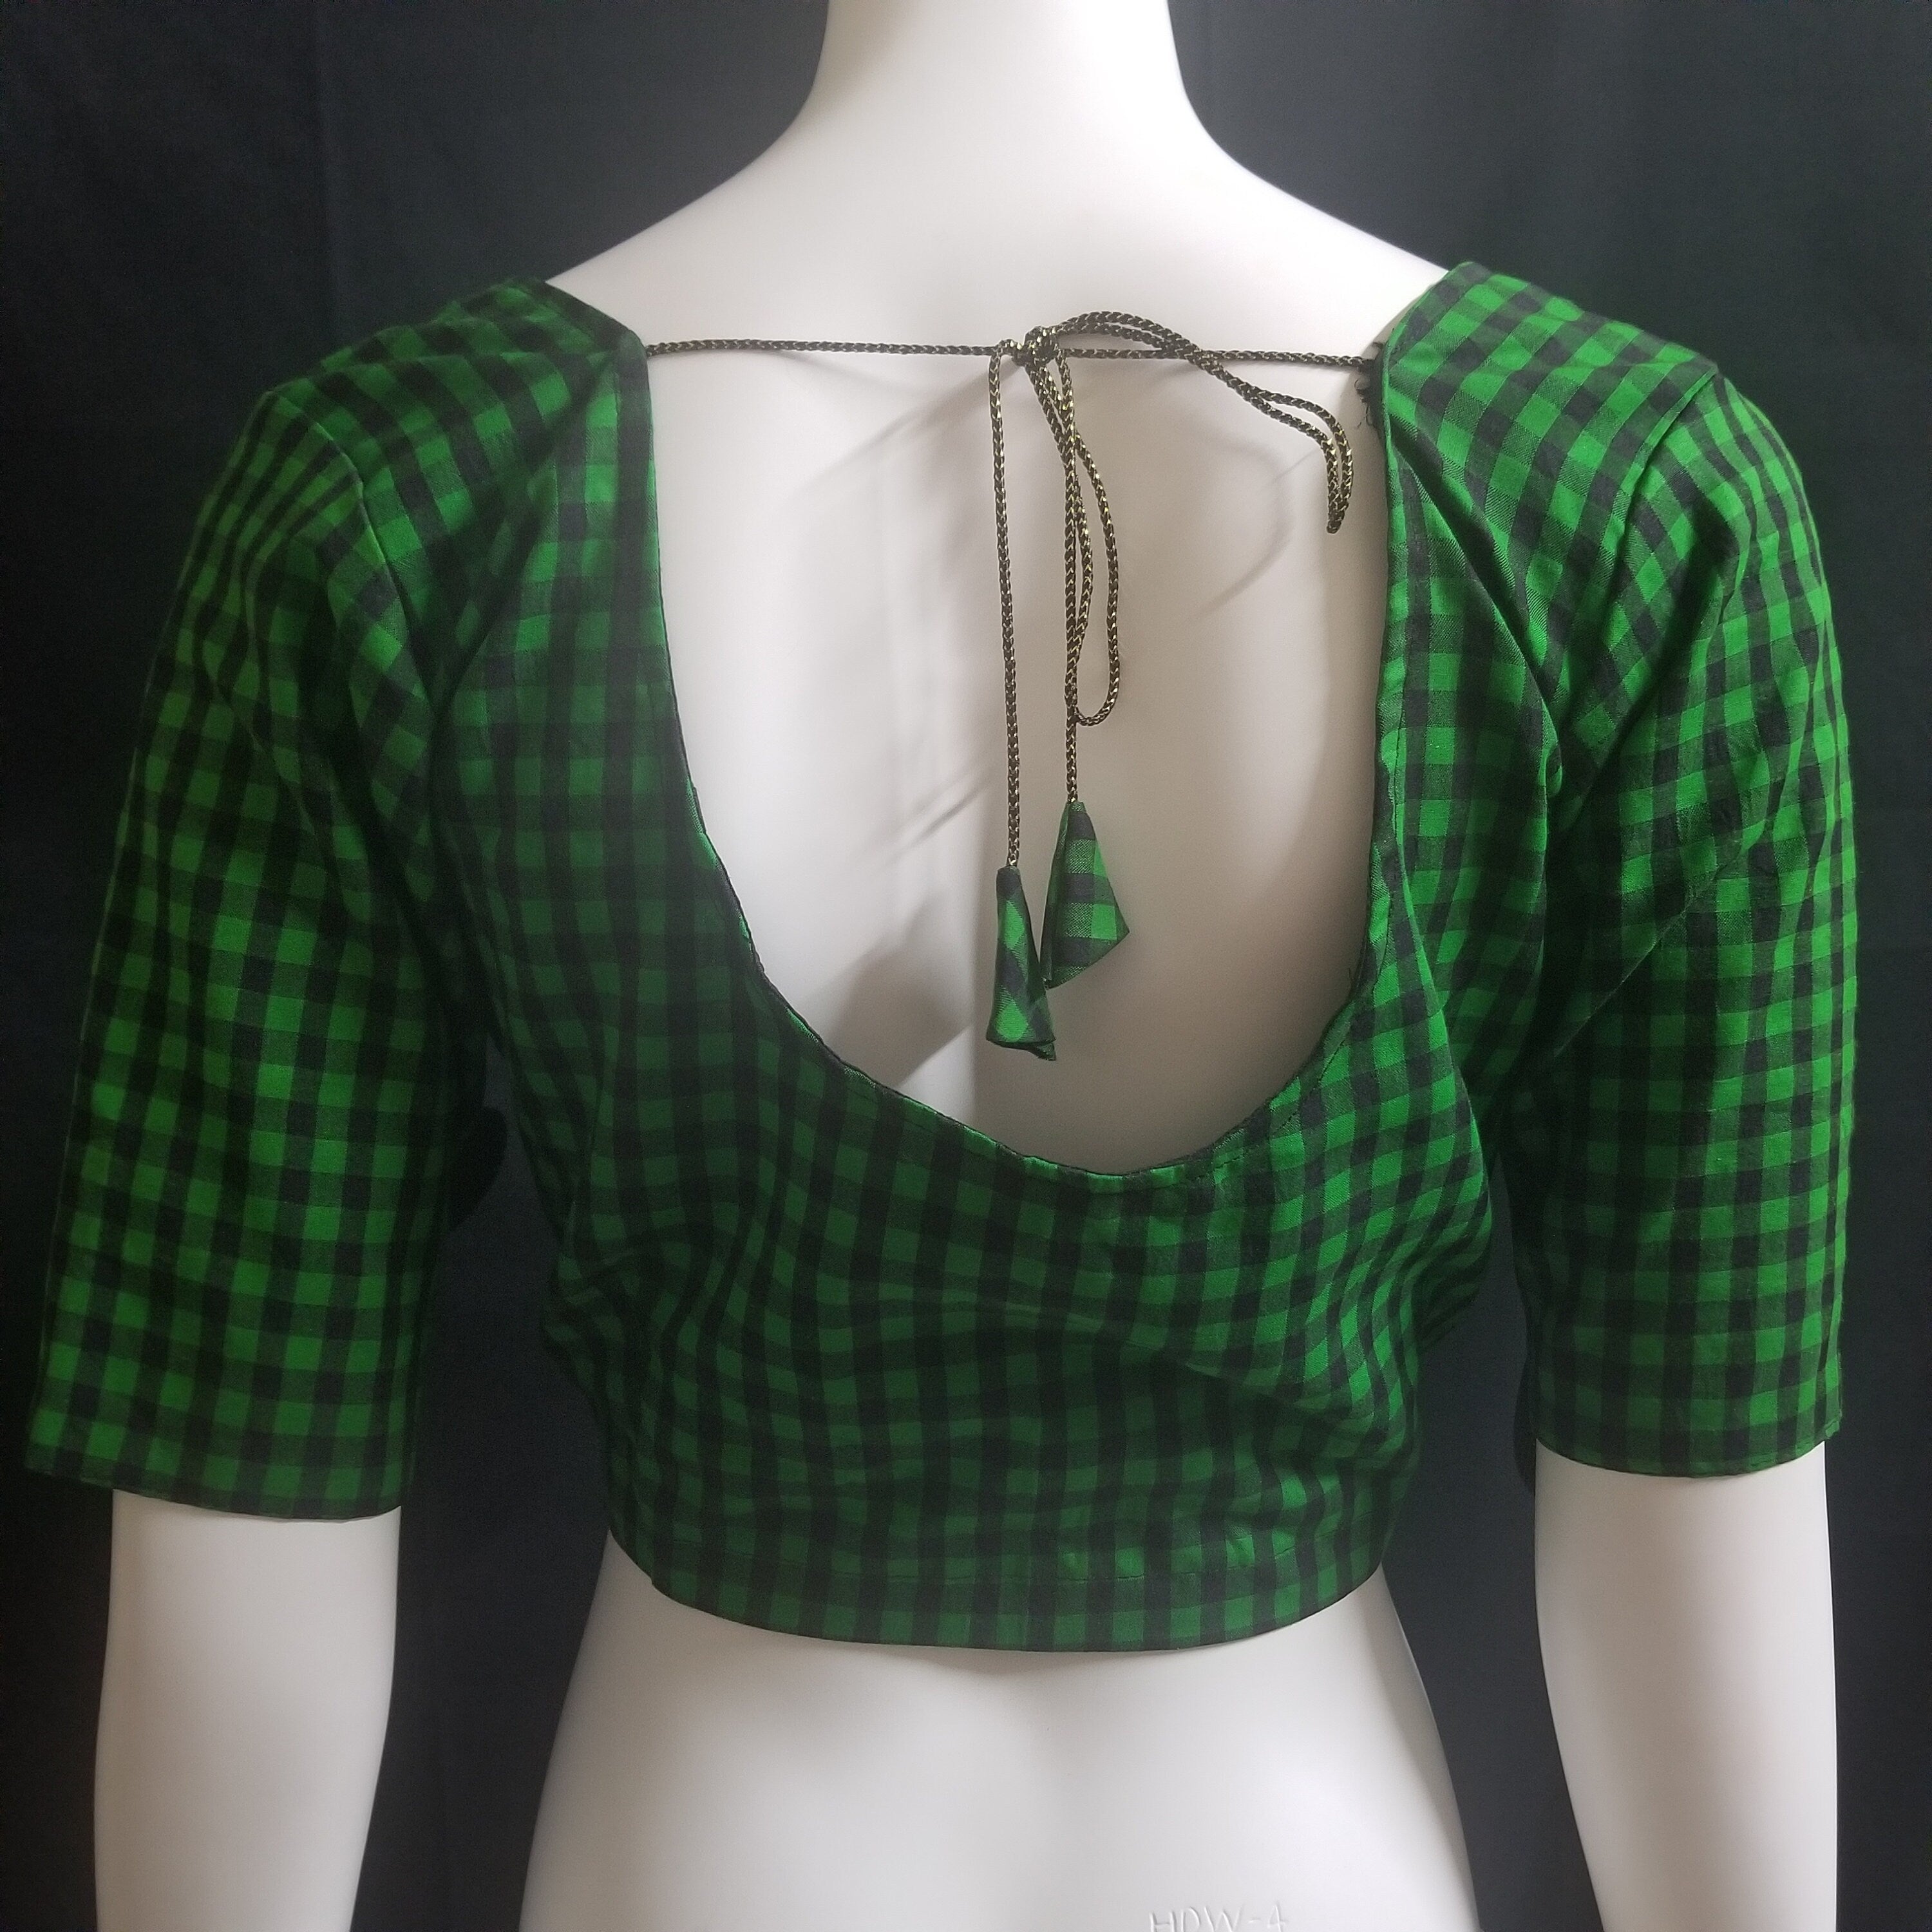 Readymade Saree Blouse - Green with Black checked Blouse - Plus size - Princess cut padded - size 42" (alter 38" to 46")